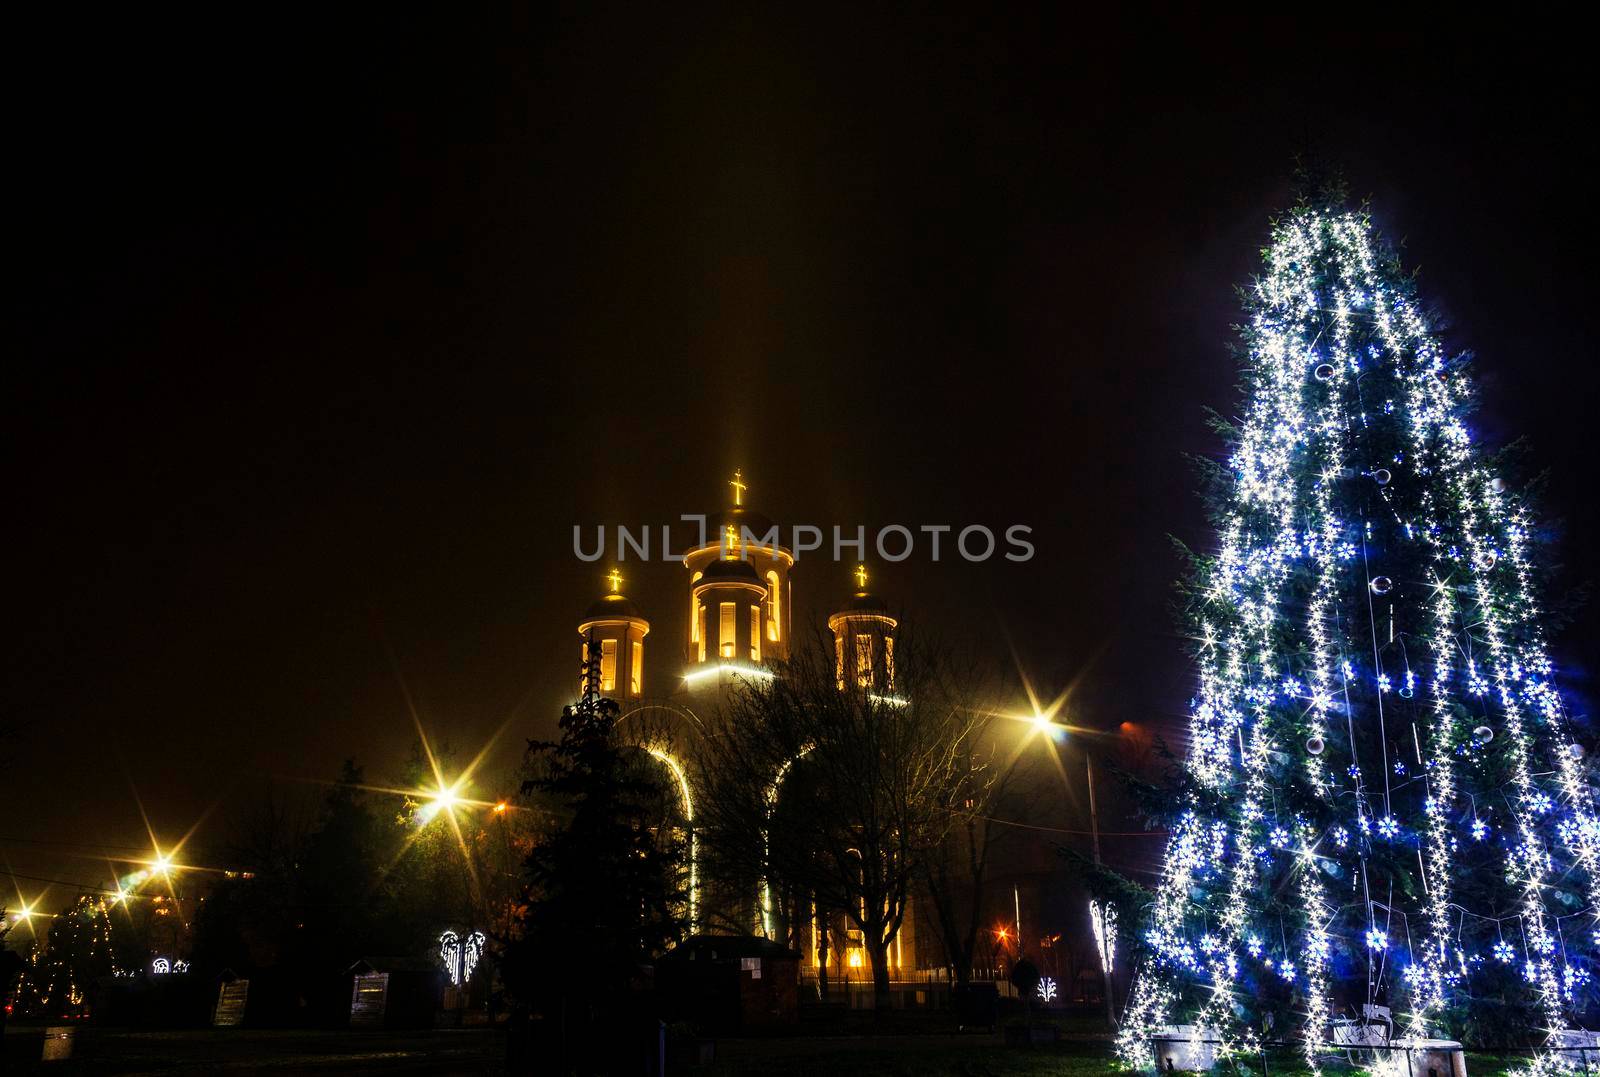 A Christmas tree near a cathedral